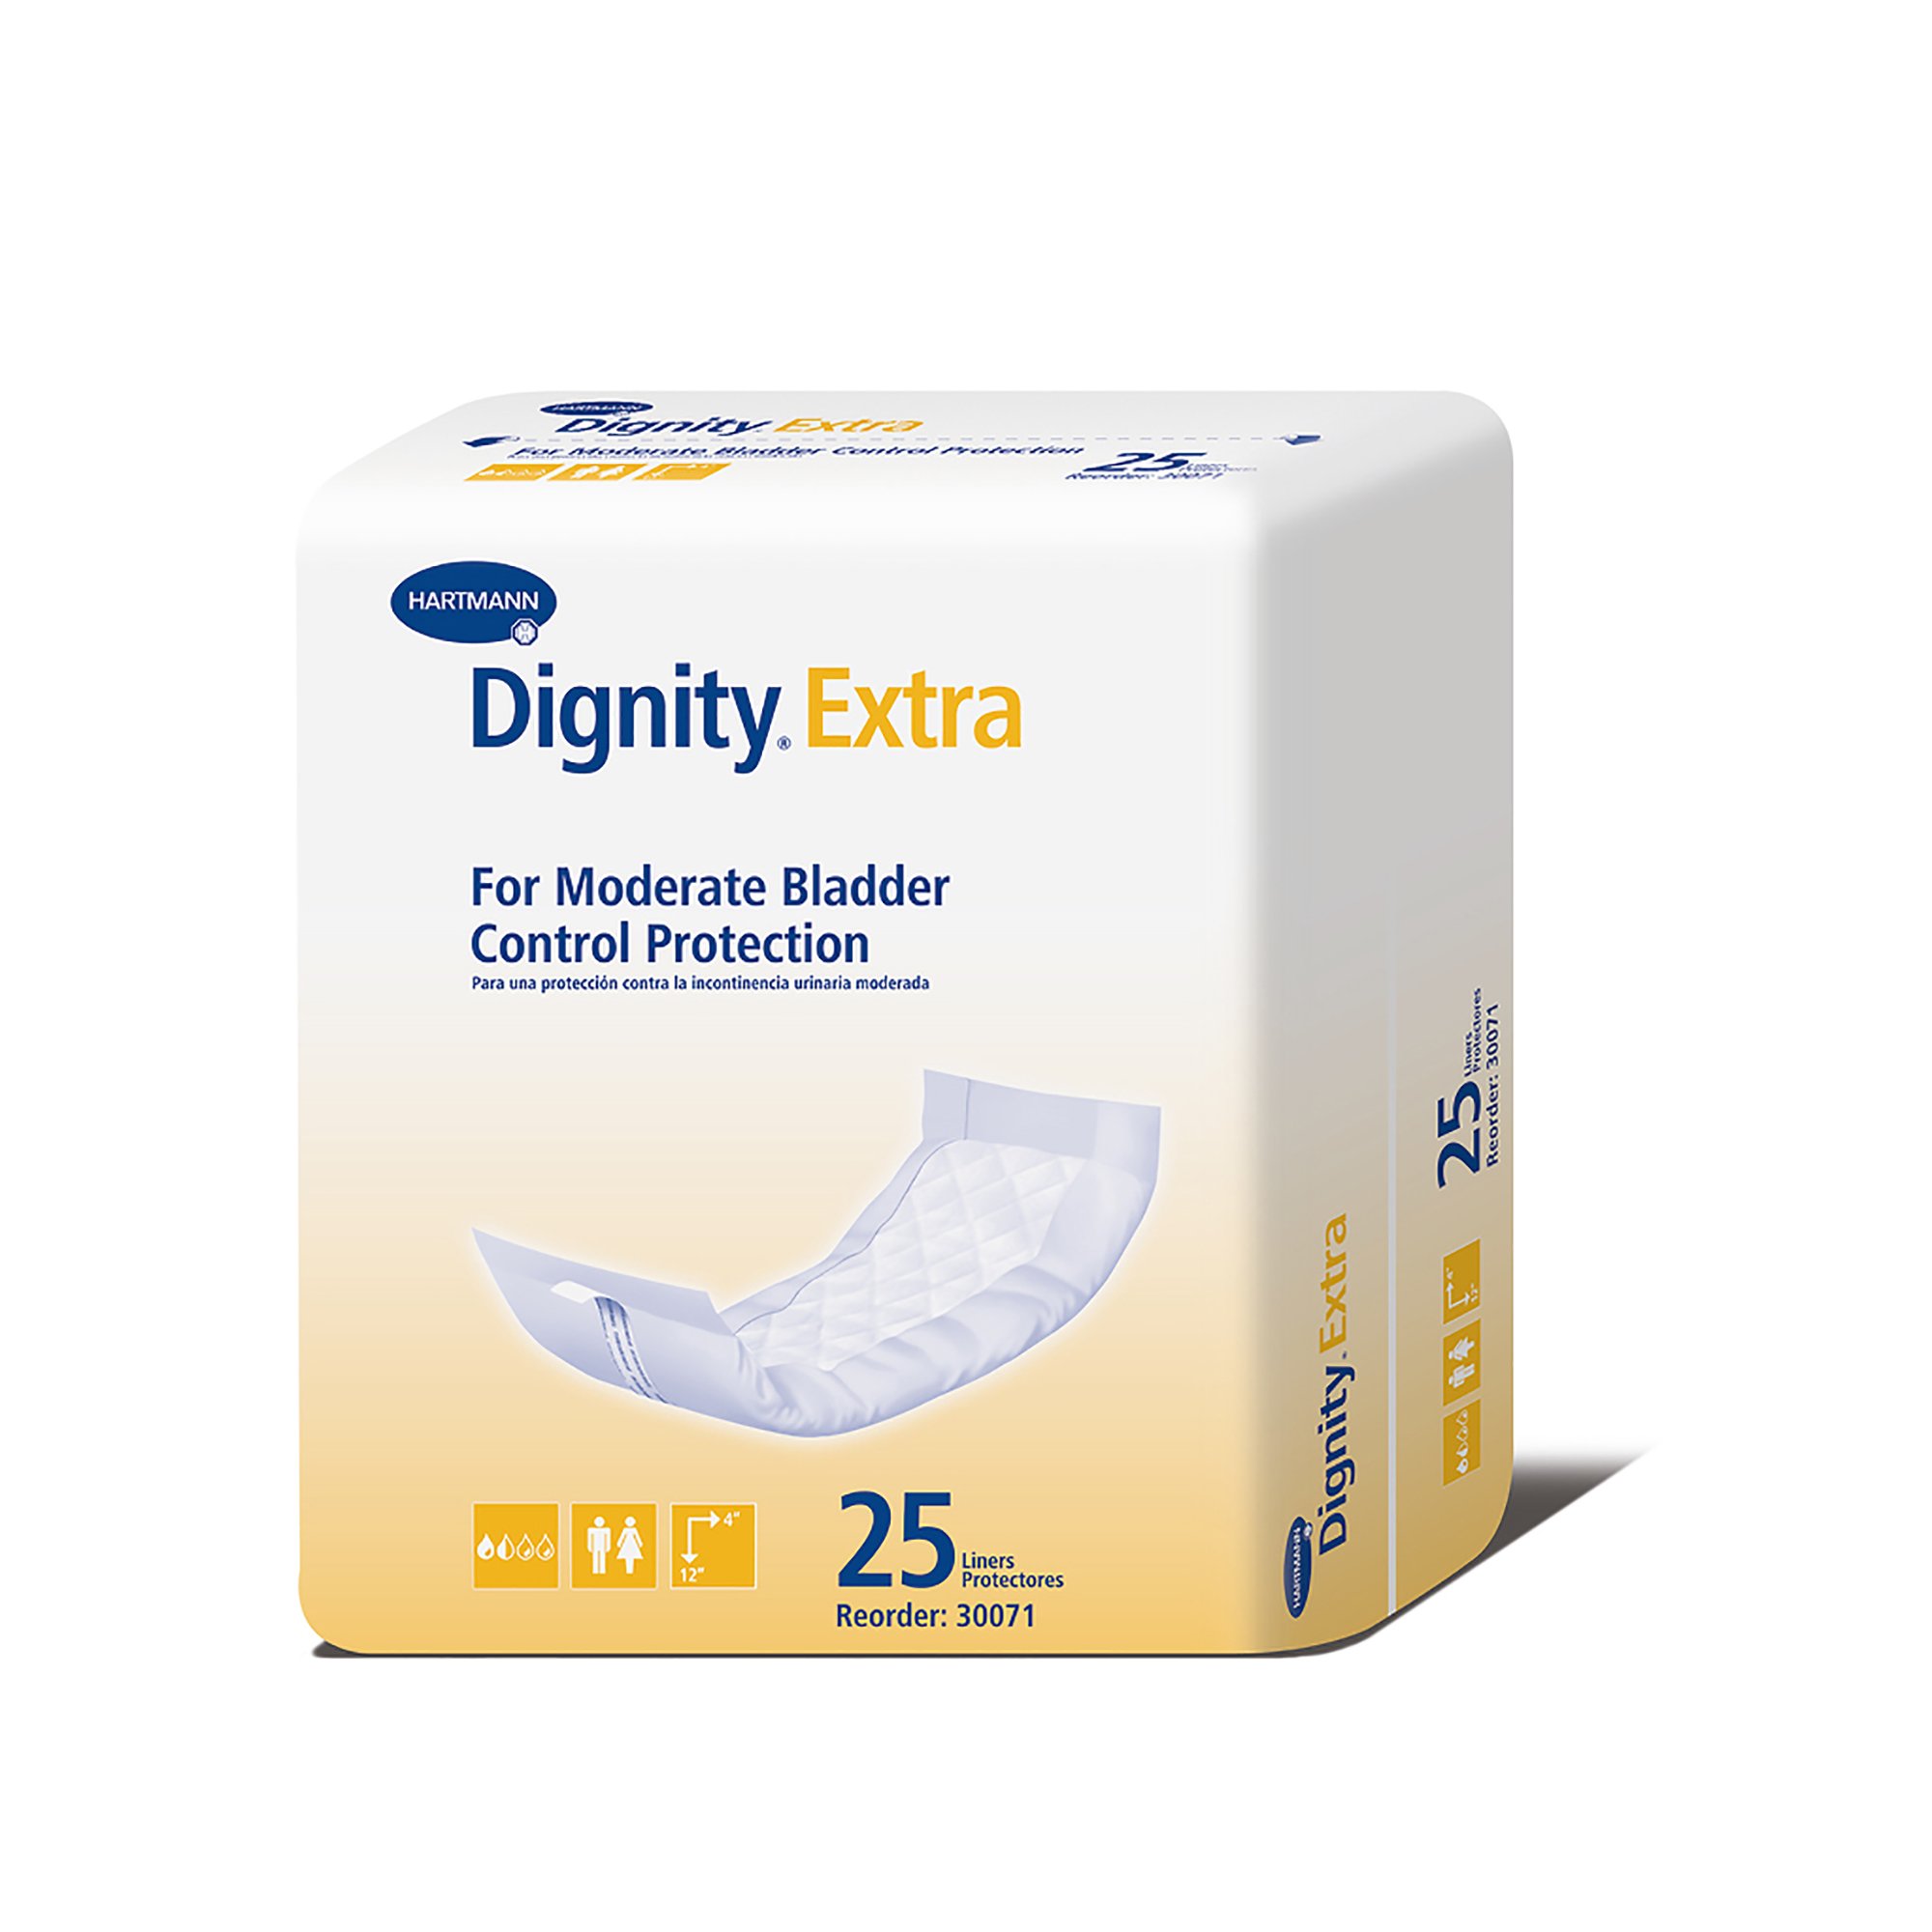 Dignity Extra For Moderate Incontinence Liner, 12-Inch Length MK 247976